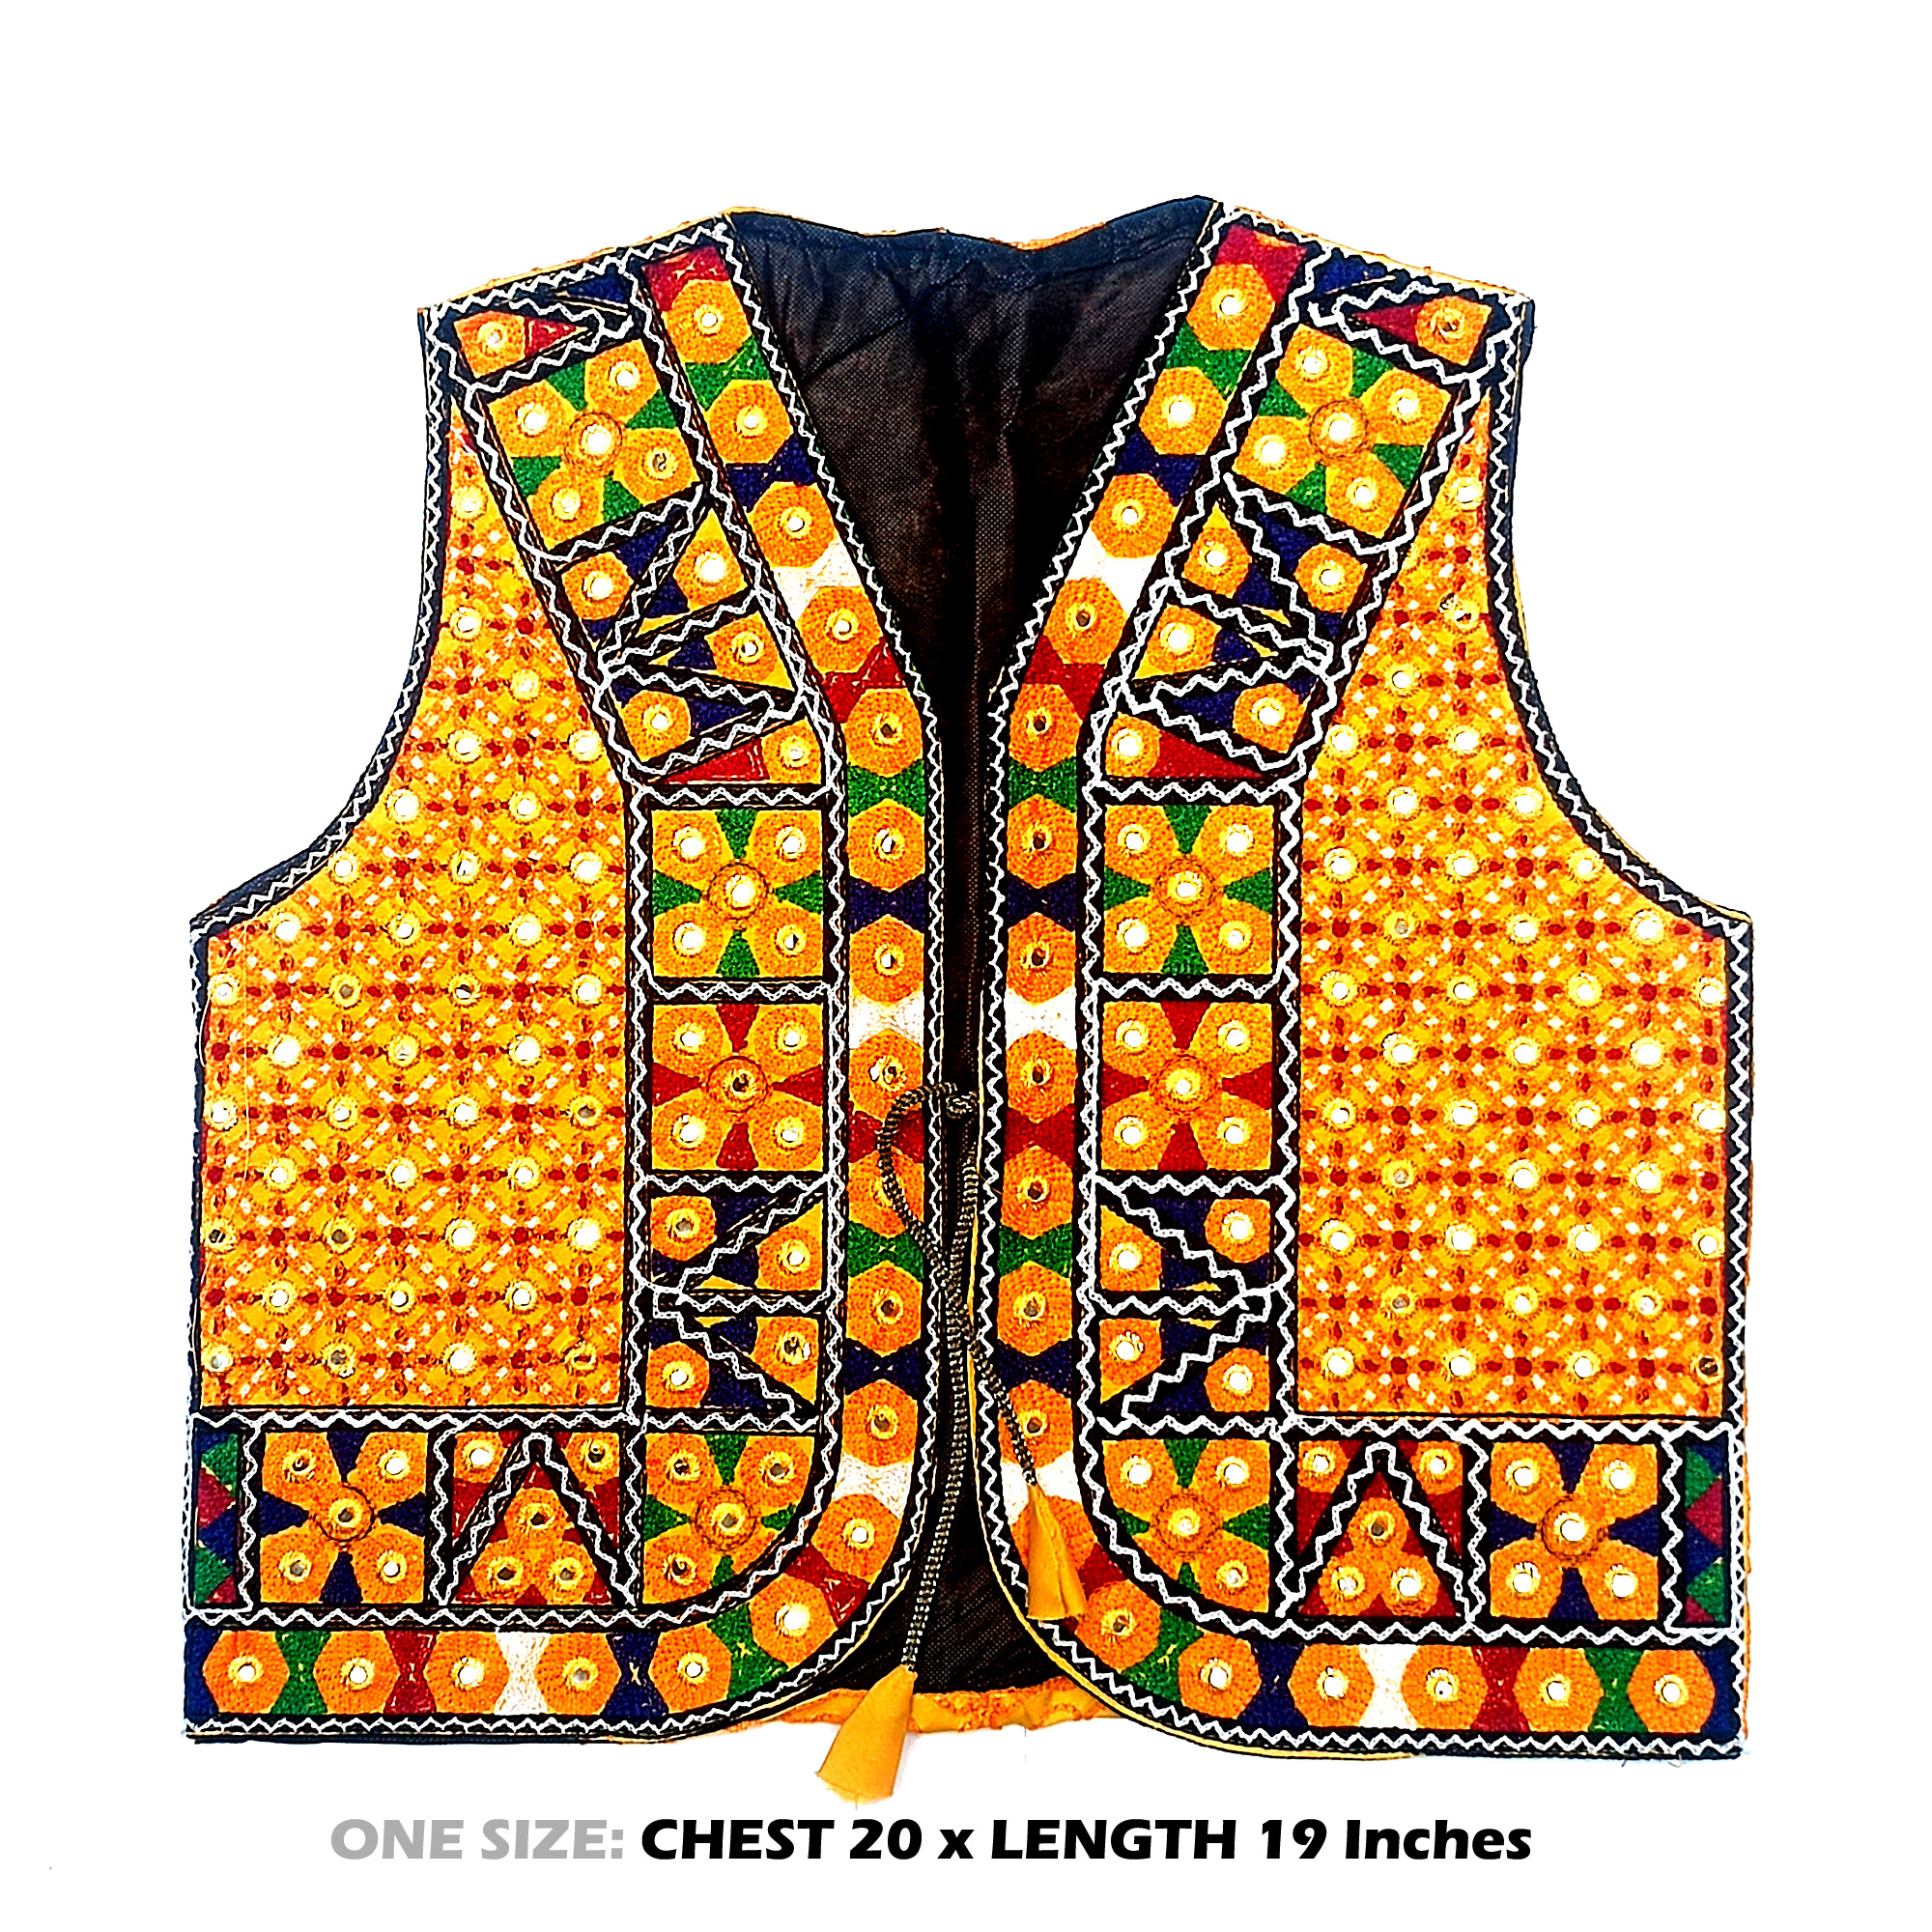 Embroidered Jackets for Ladies in Pakistan